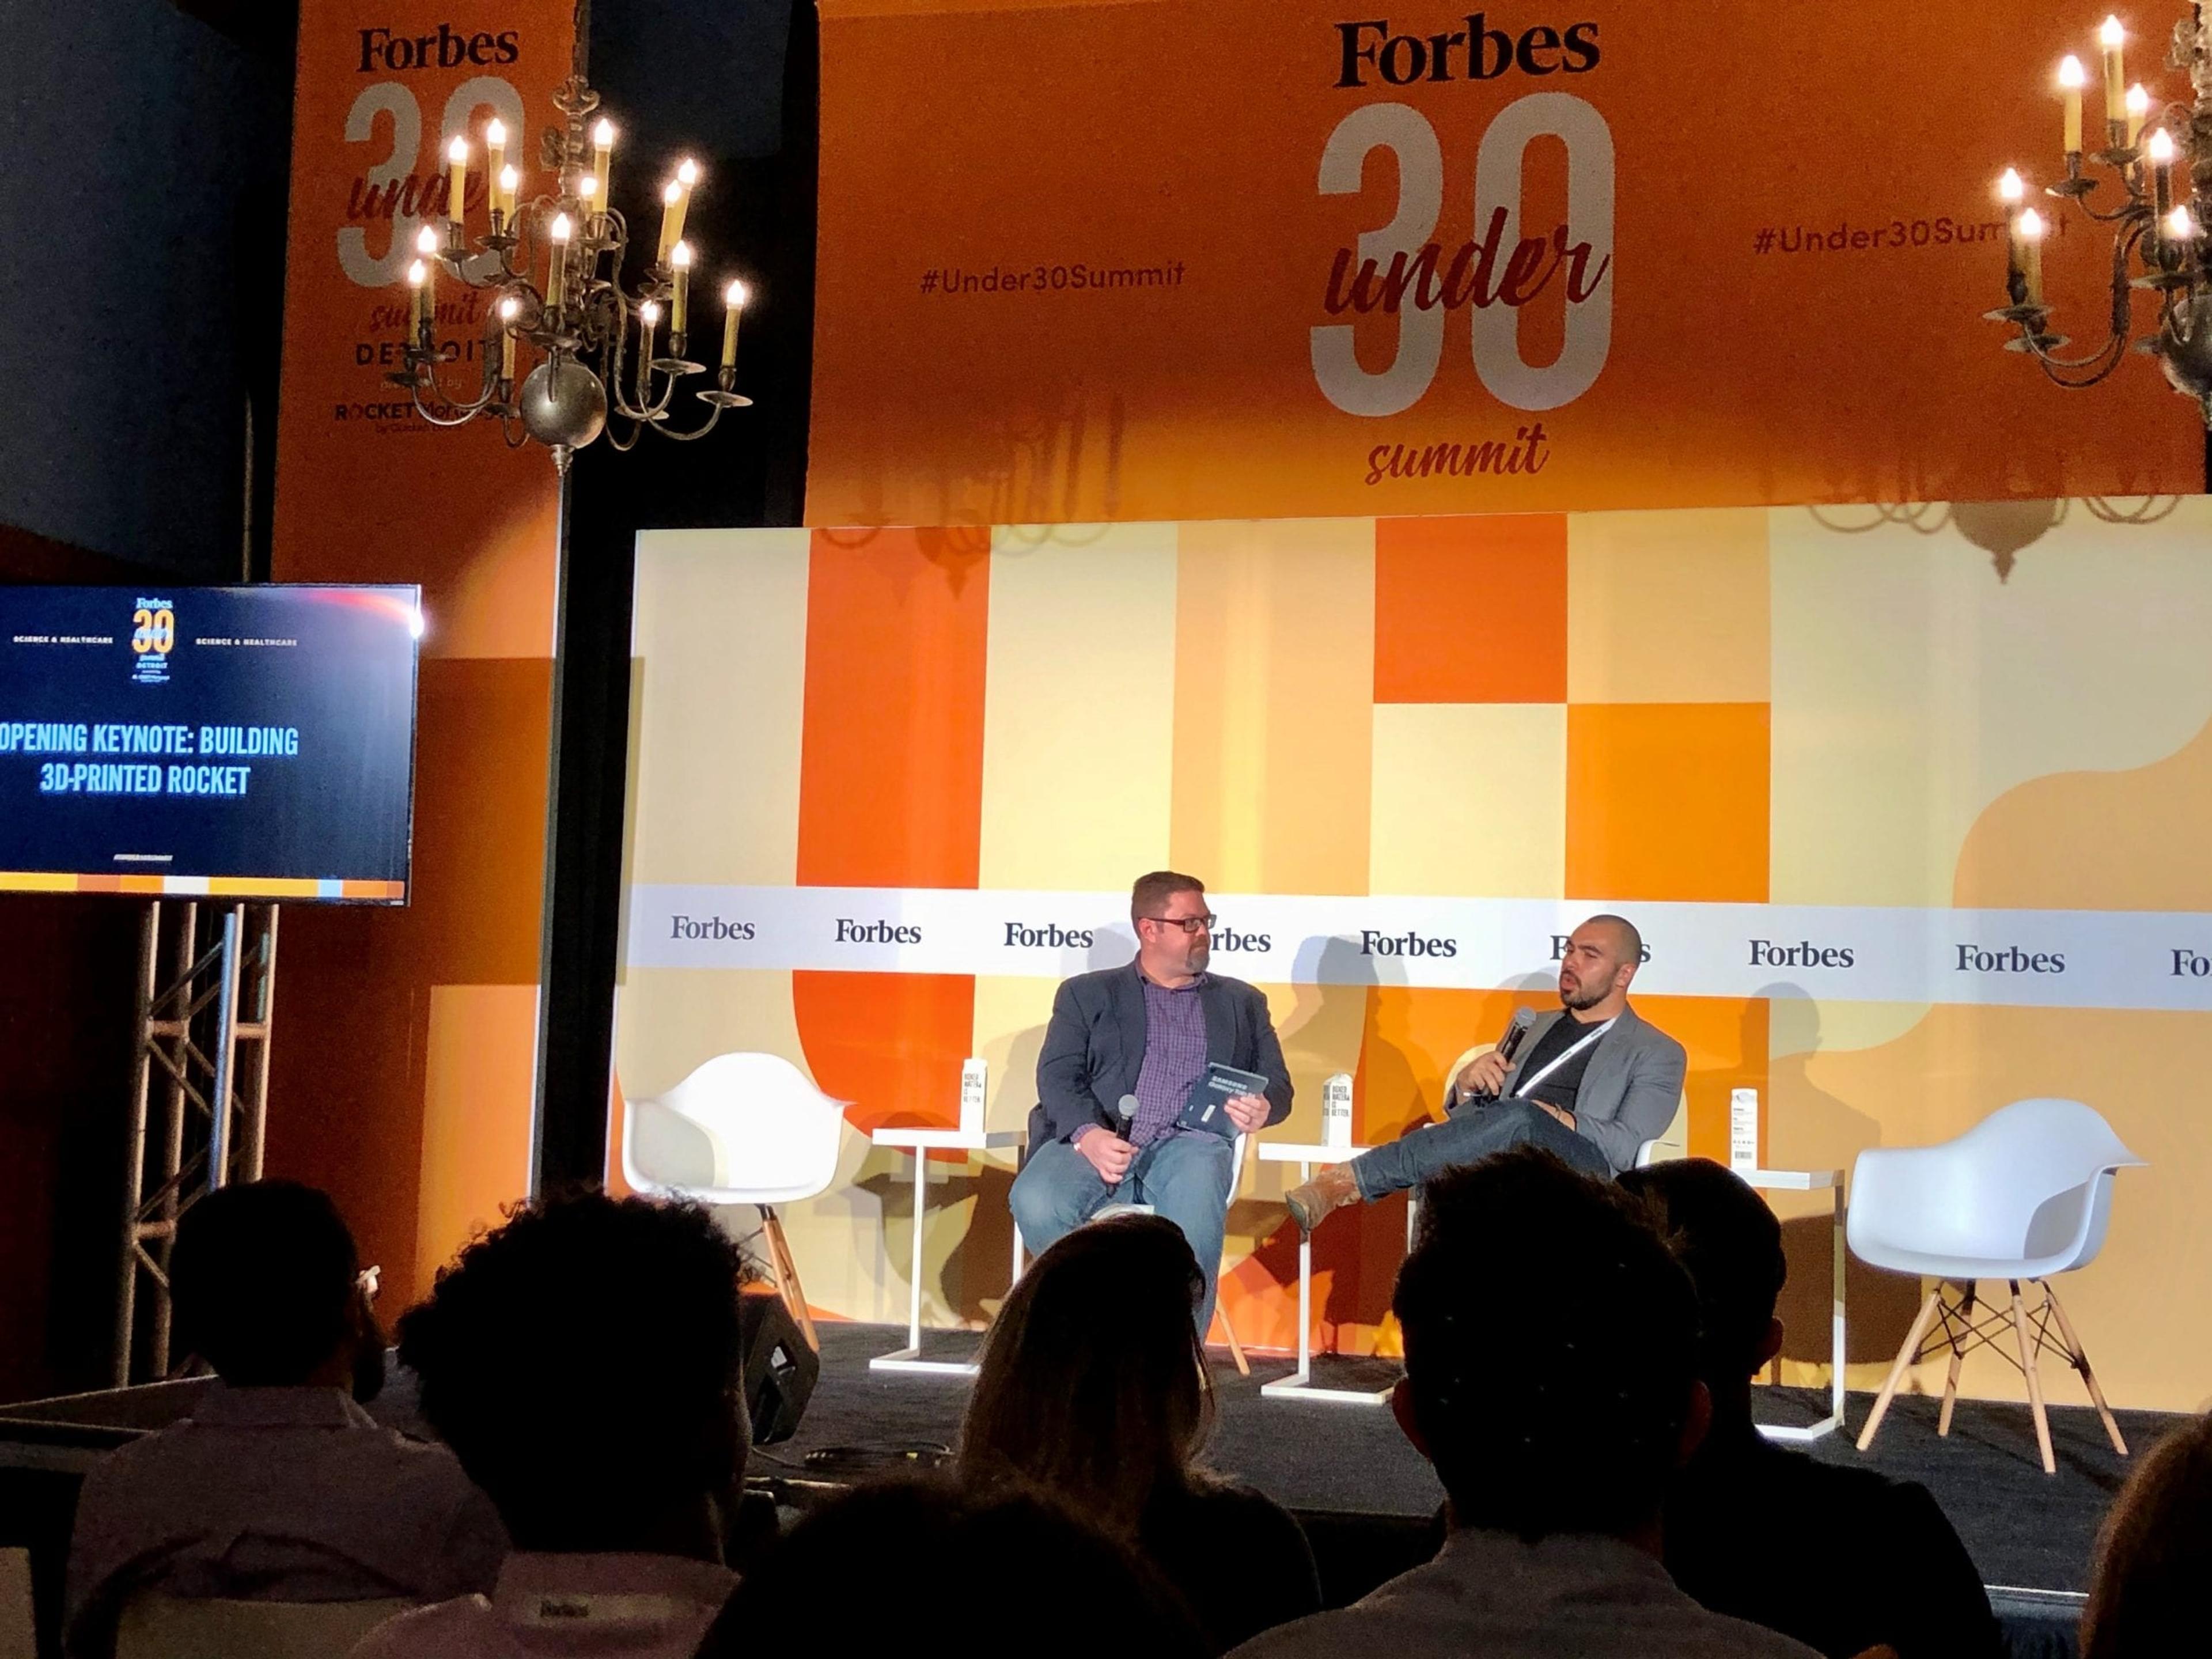 Two men interview each other on stage at the Forbes Uner 30 Summit